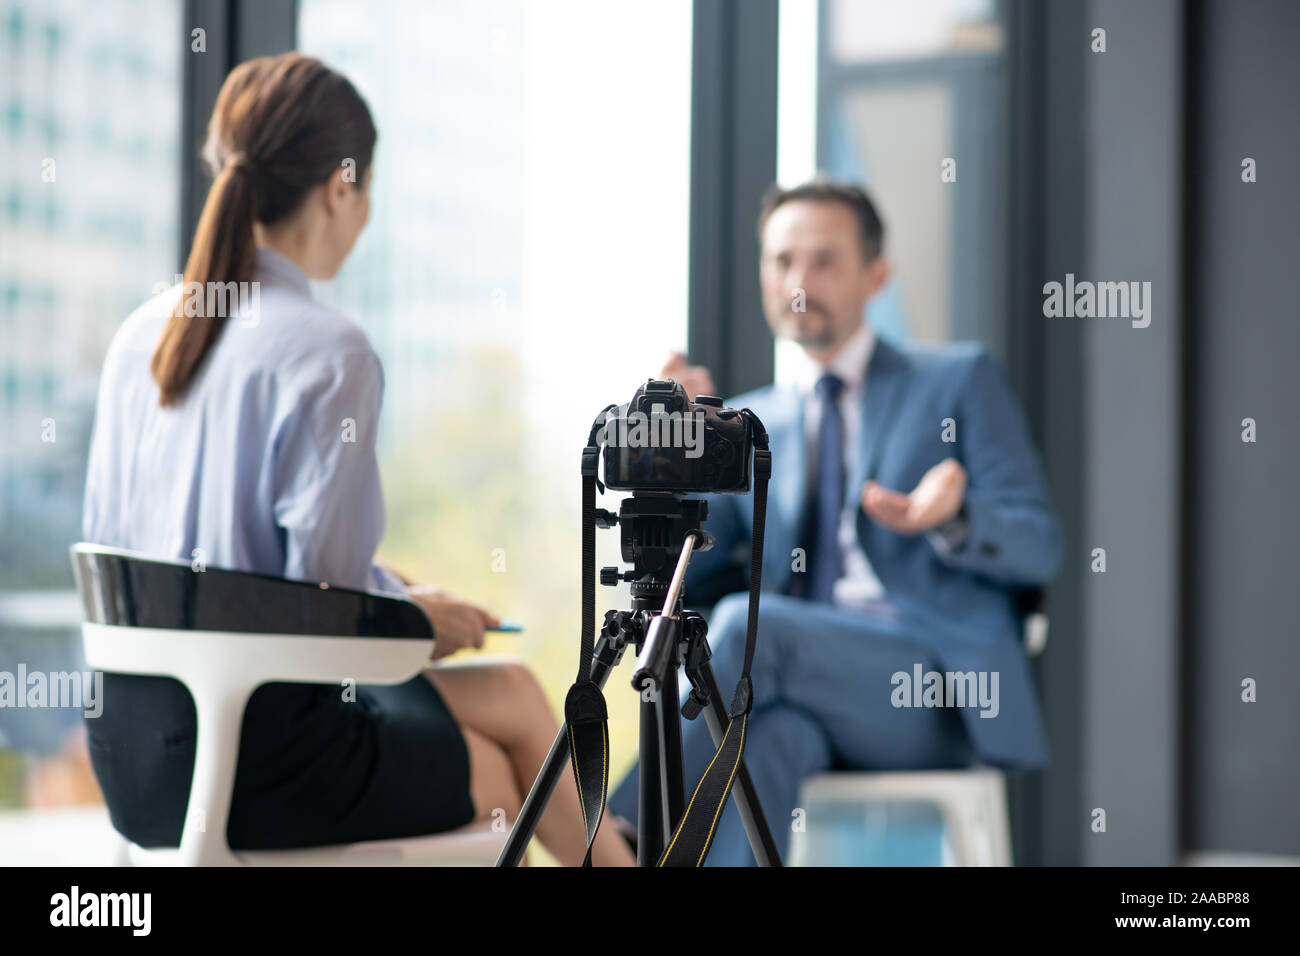 Camera filming businessman giving interview to famous journalist Stock Photo